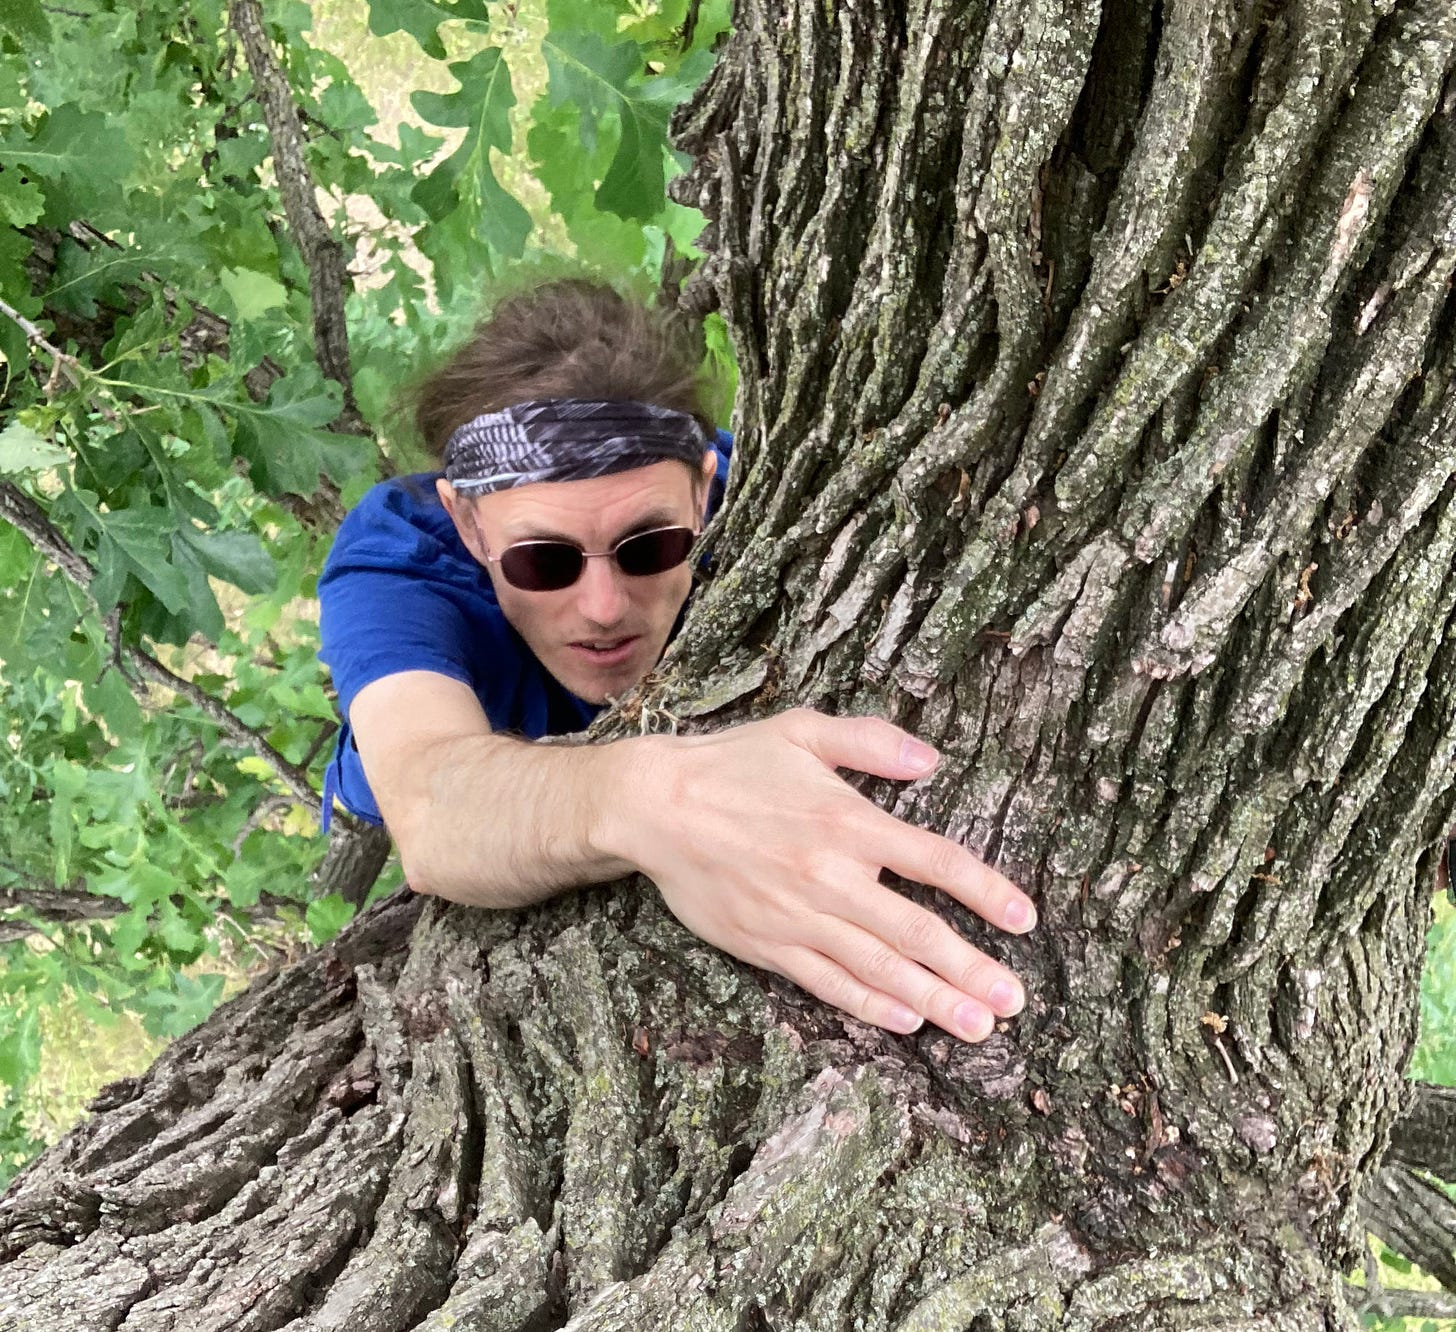 The author, seen from above, with their hand on a notch in the tree, looking upward and ready to climb.